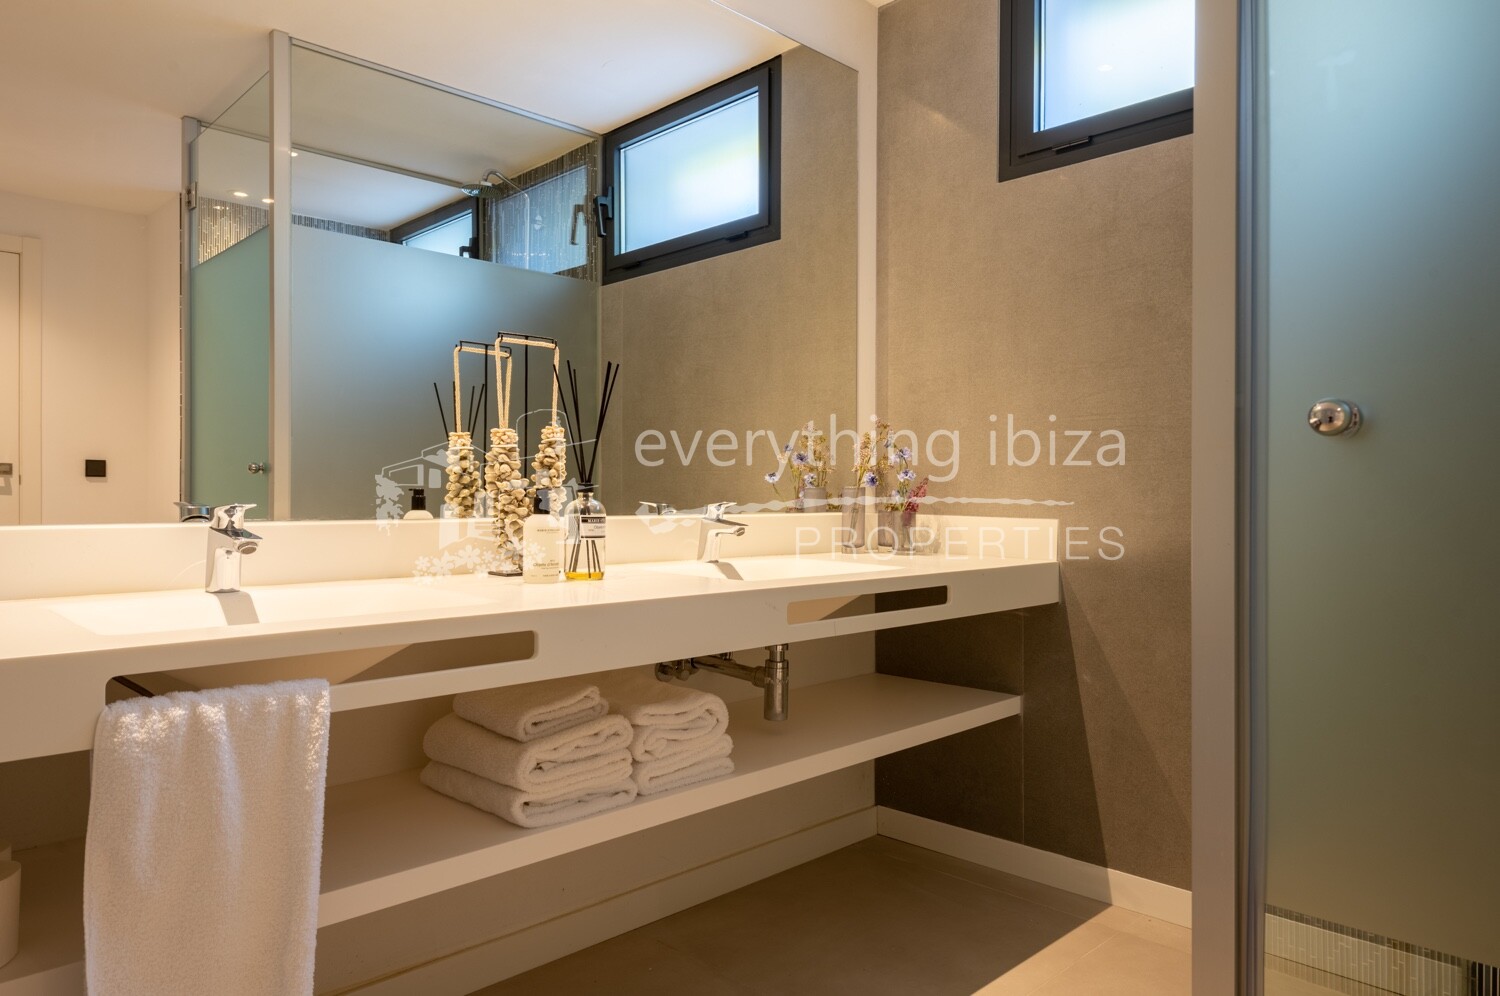 Magnificent Luxury Villa Close to the Beach & Jesus, ref. 1480, for sale in Ibiza by everything ibiza Properties